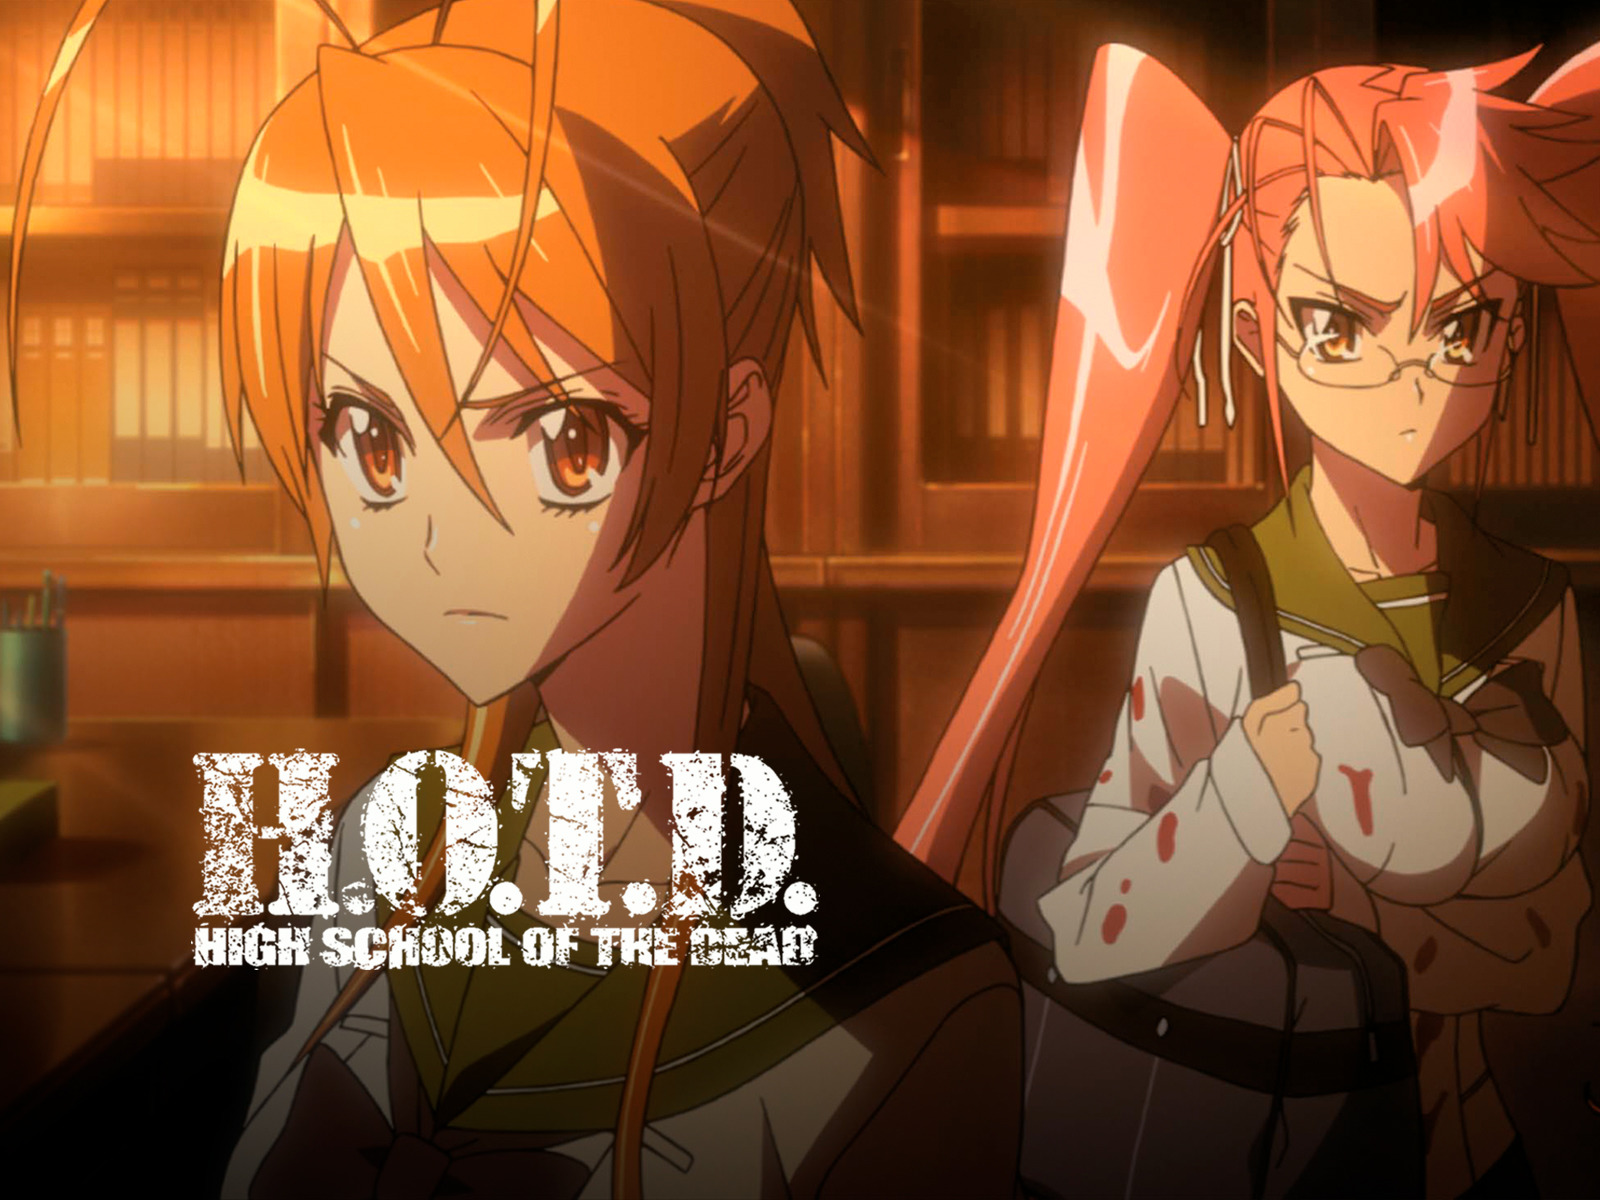 april peters recommends watch highschool of the dead pic